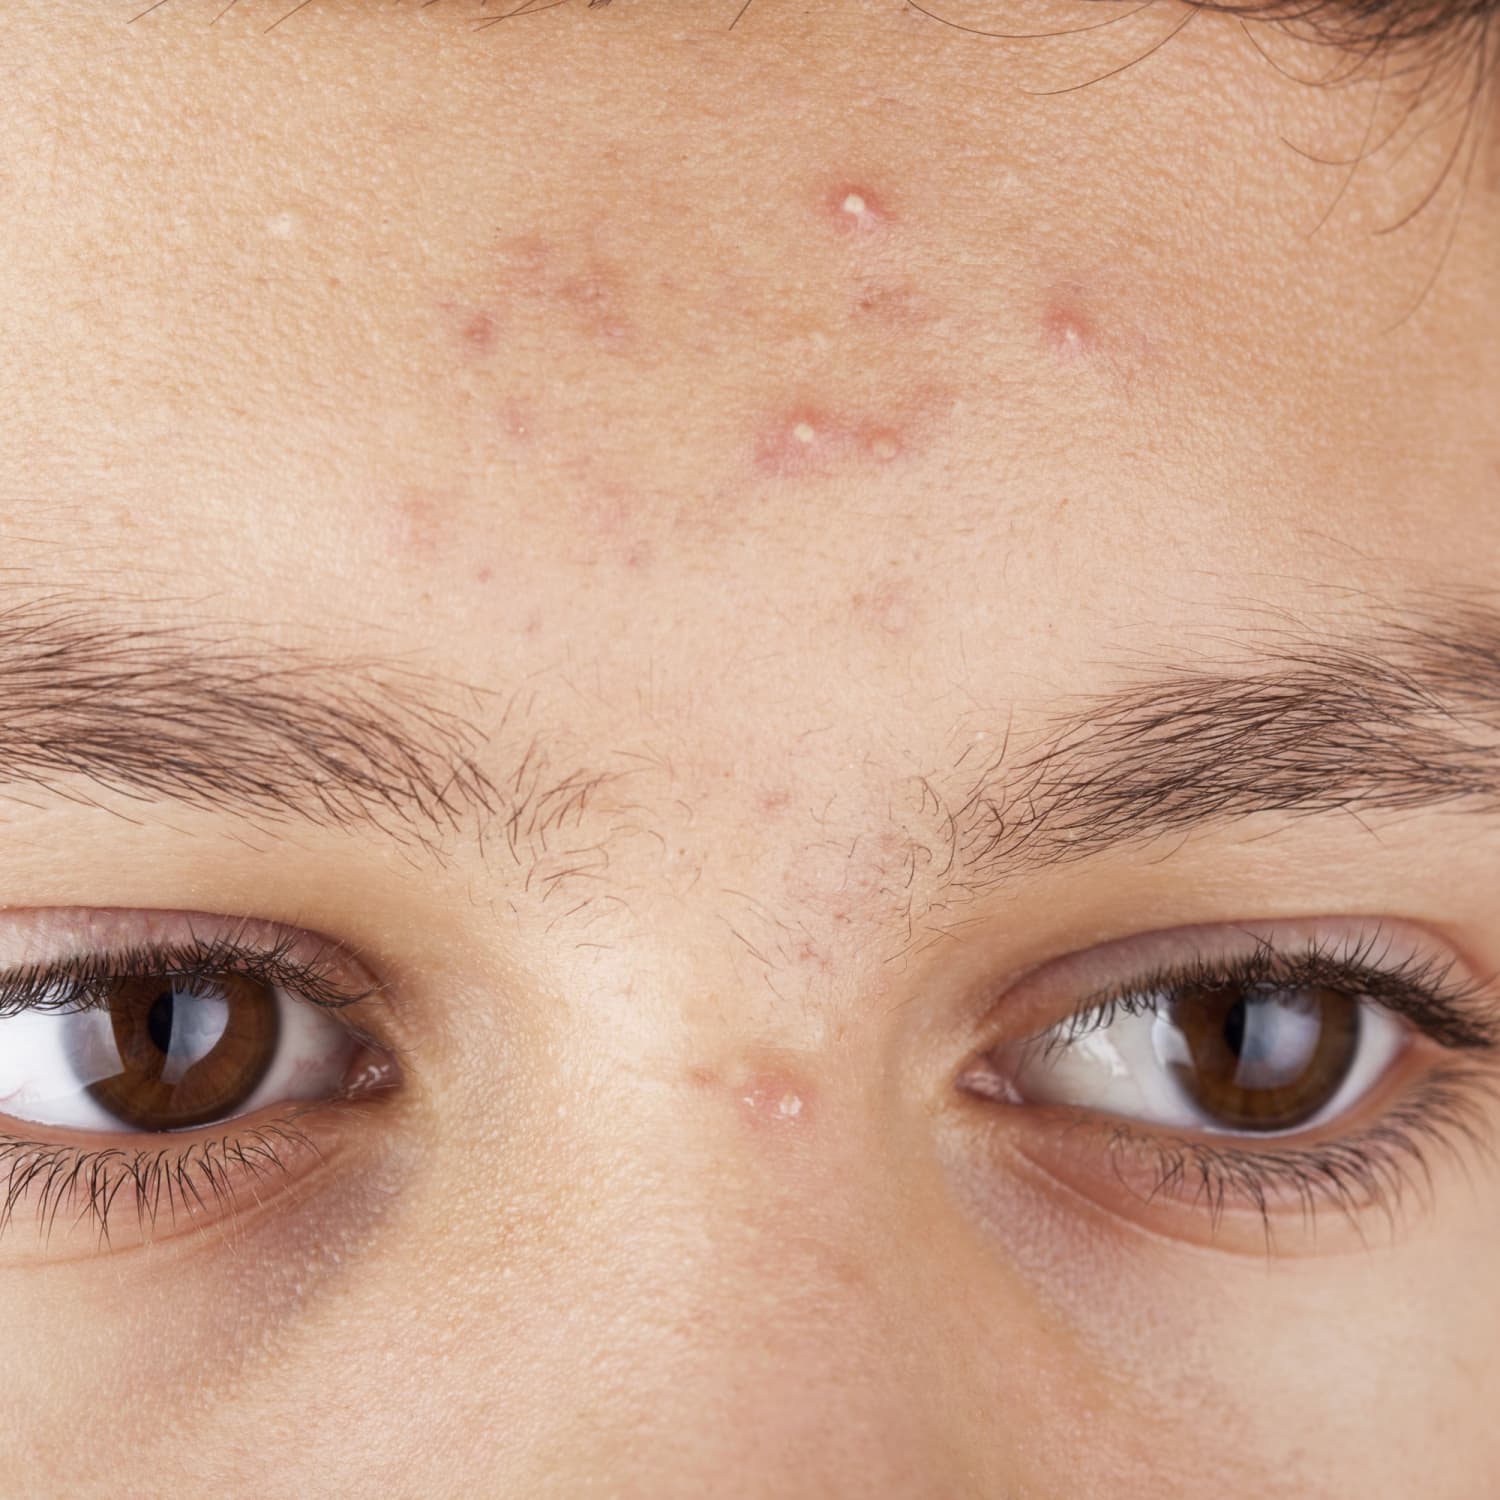 How rare is acne?